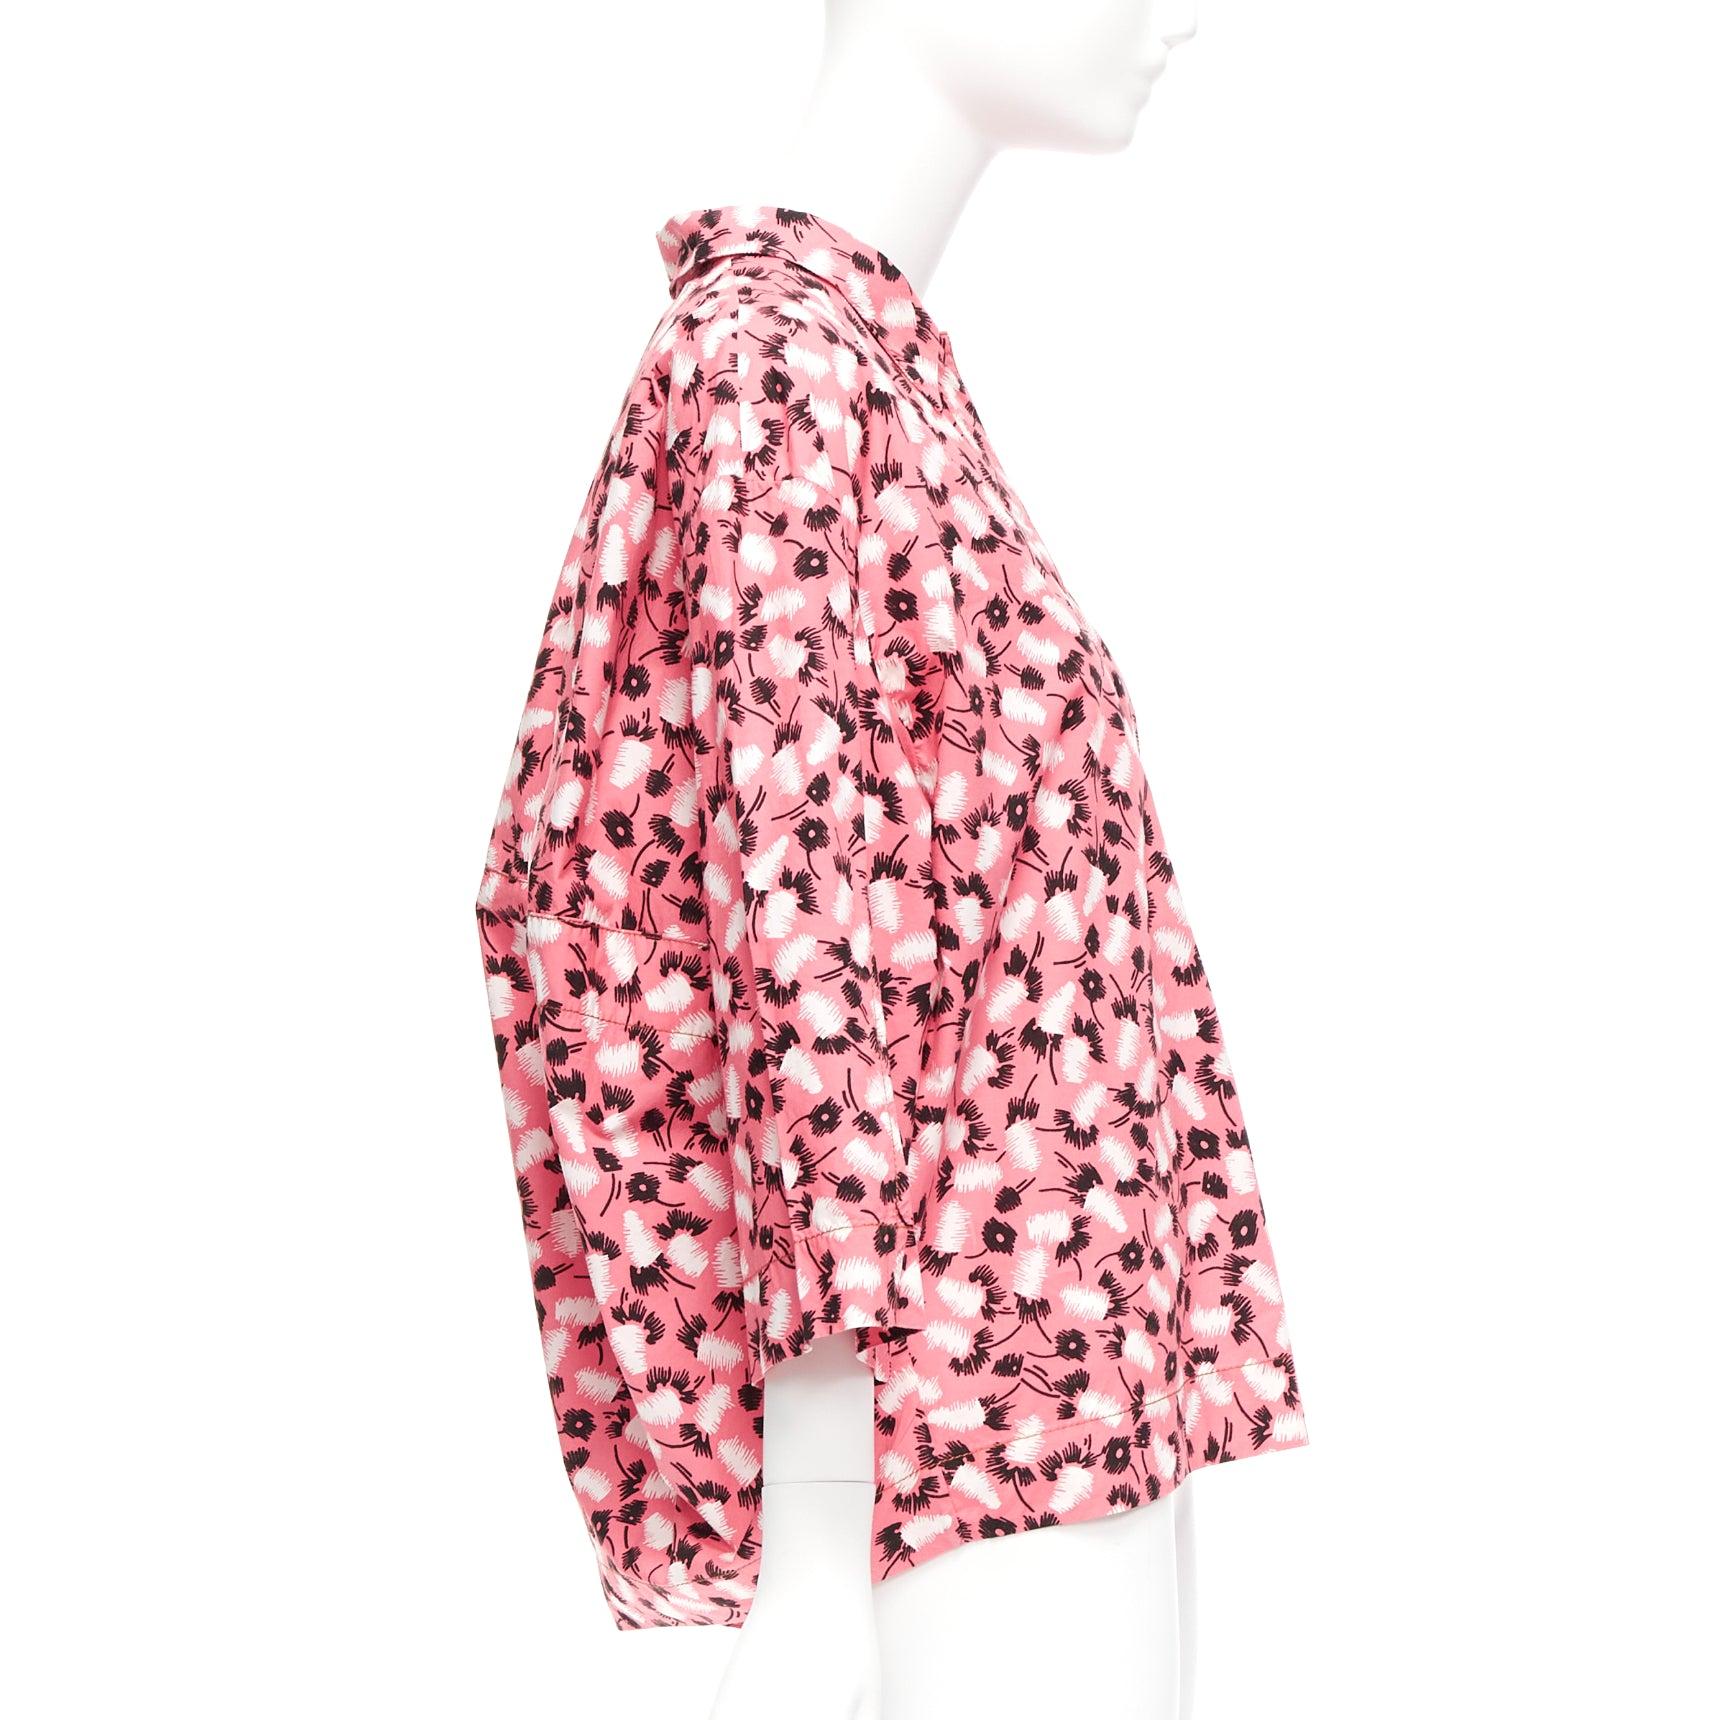 MARNI 100% cotton pink black white feather print boxy shirt IT38 XS
Reference: CELG/A00334
Brand: Marni
Material: Cotton
Color: Multicolour, Pink
Pattern: Abstract
Closure: Button
Extra Details: Concealed buttons. Cocoon back.
Made in: